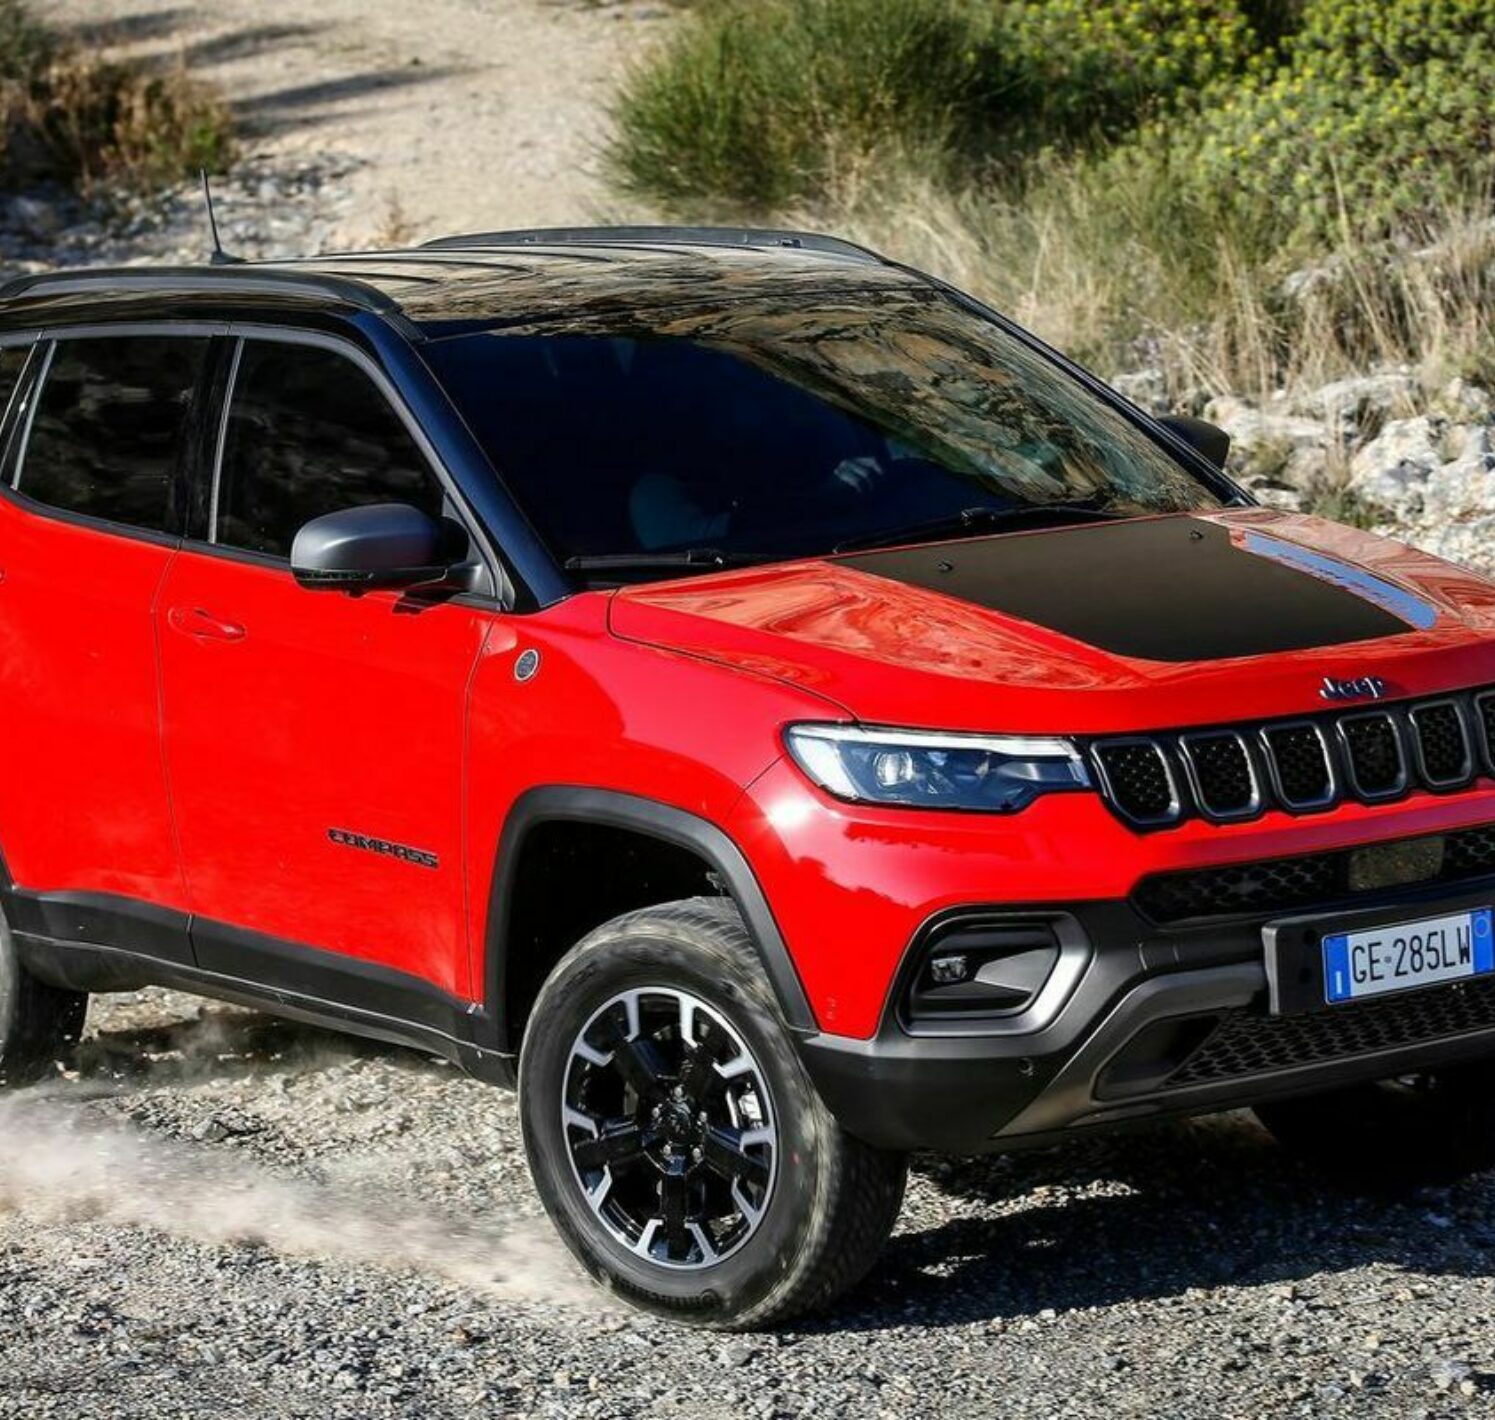 https://autofilter.sk/assets/images/compass/gallery/jeep-compass-2021_12-galeria.jpg - obrazok